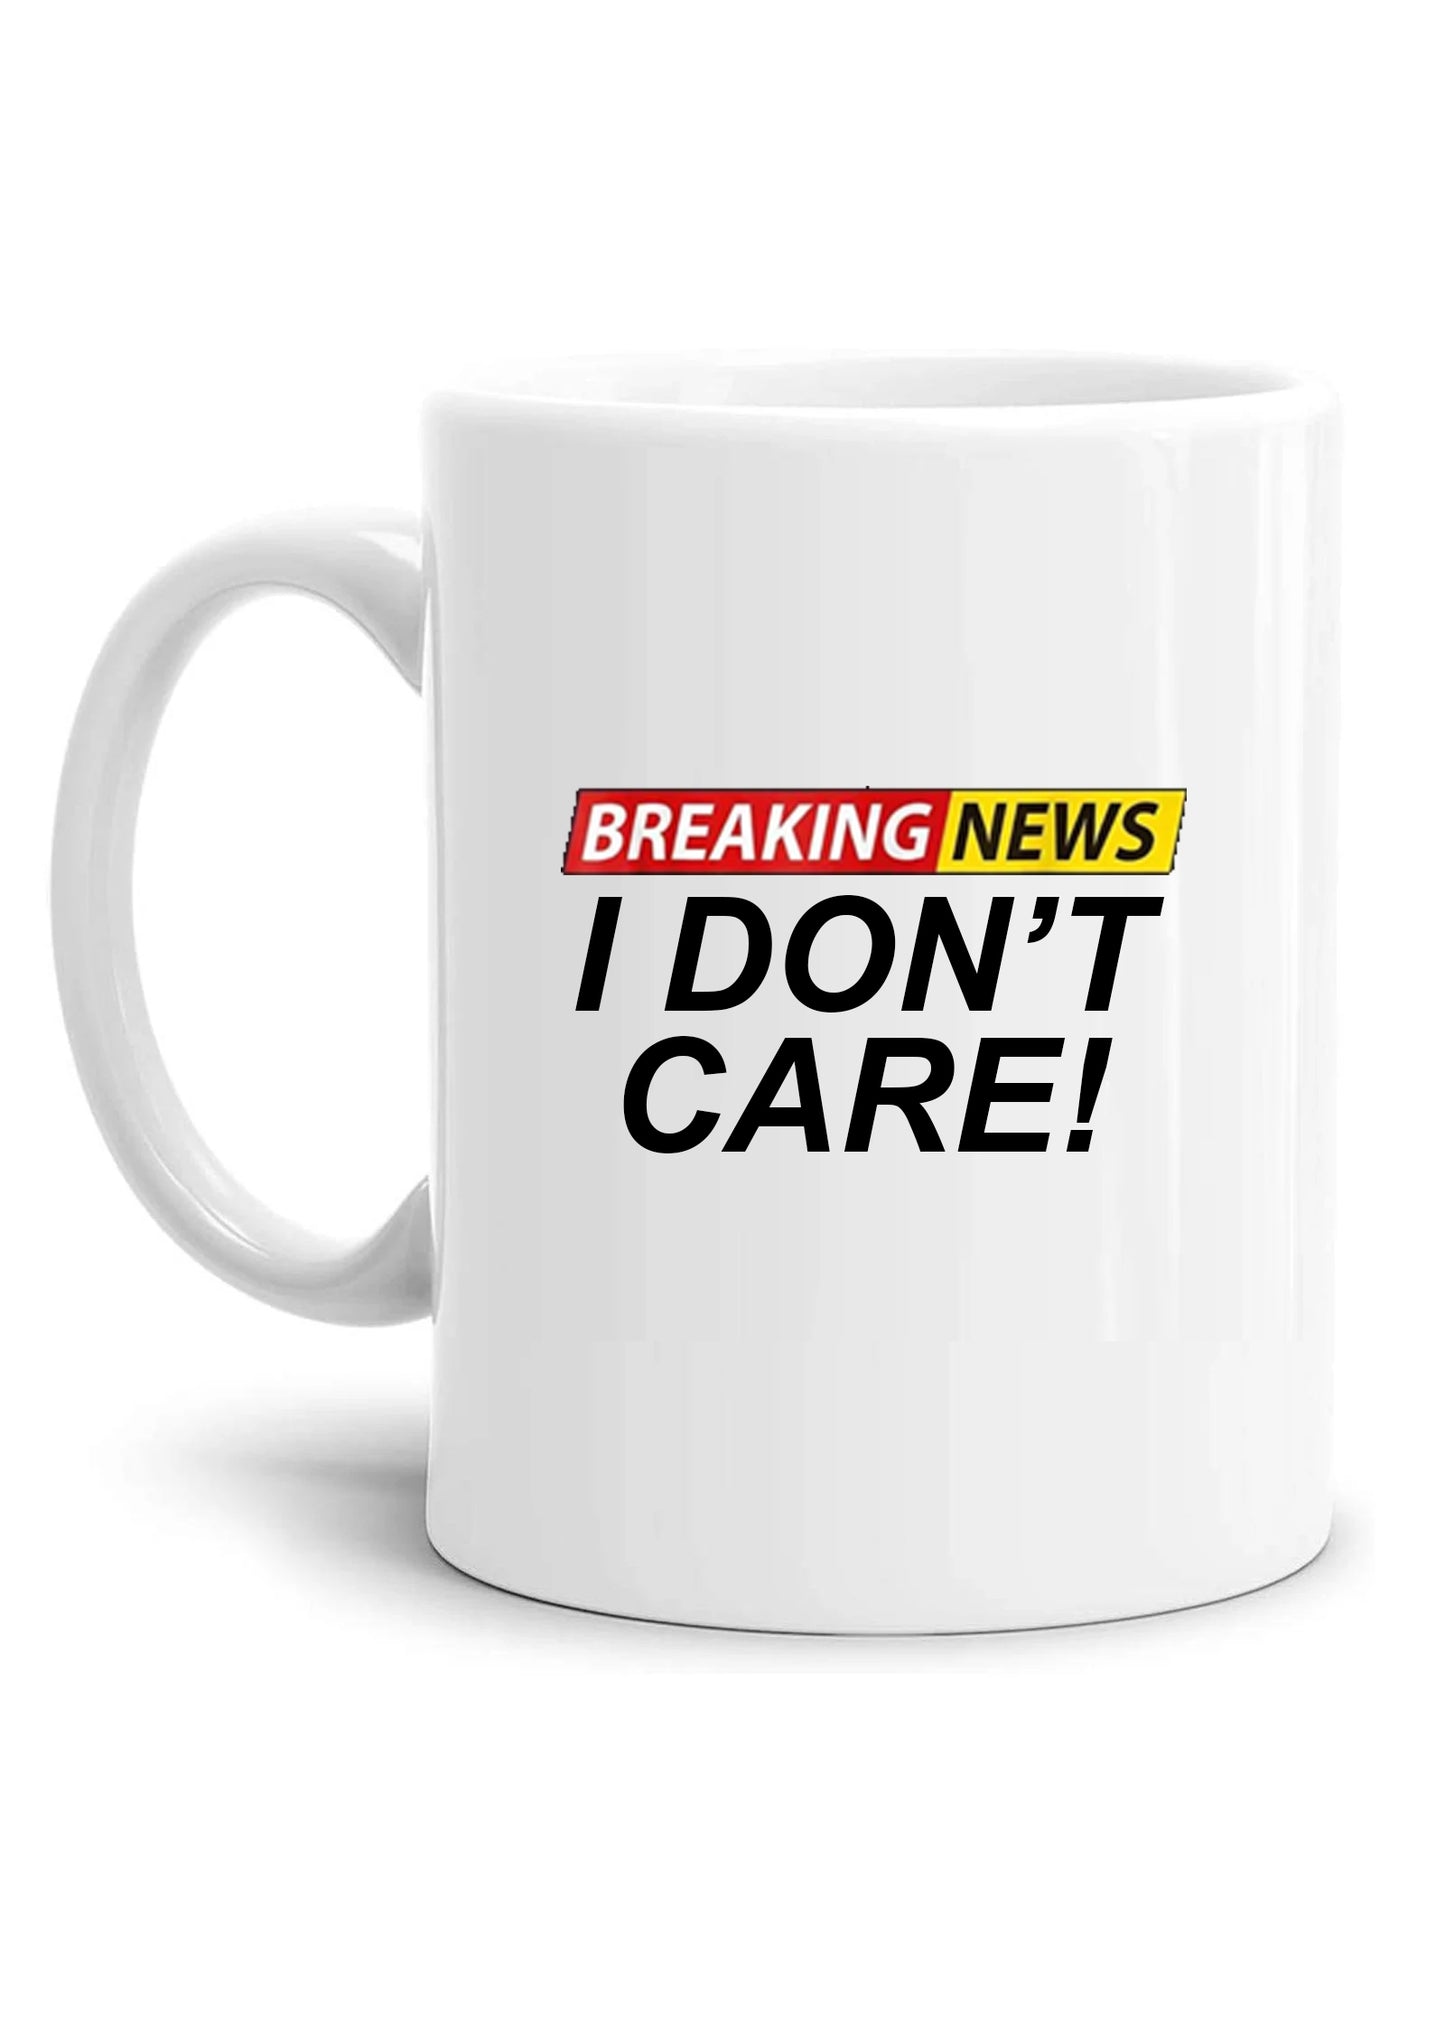 Mug-breaking news dont care funny nice gift mum dad colleagues friends ceramic for breakfast coffee or tea copy copy